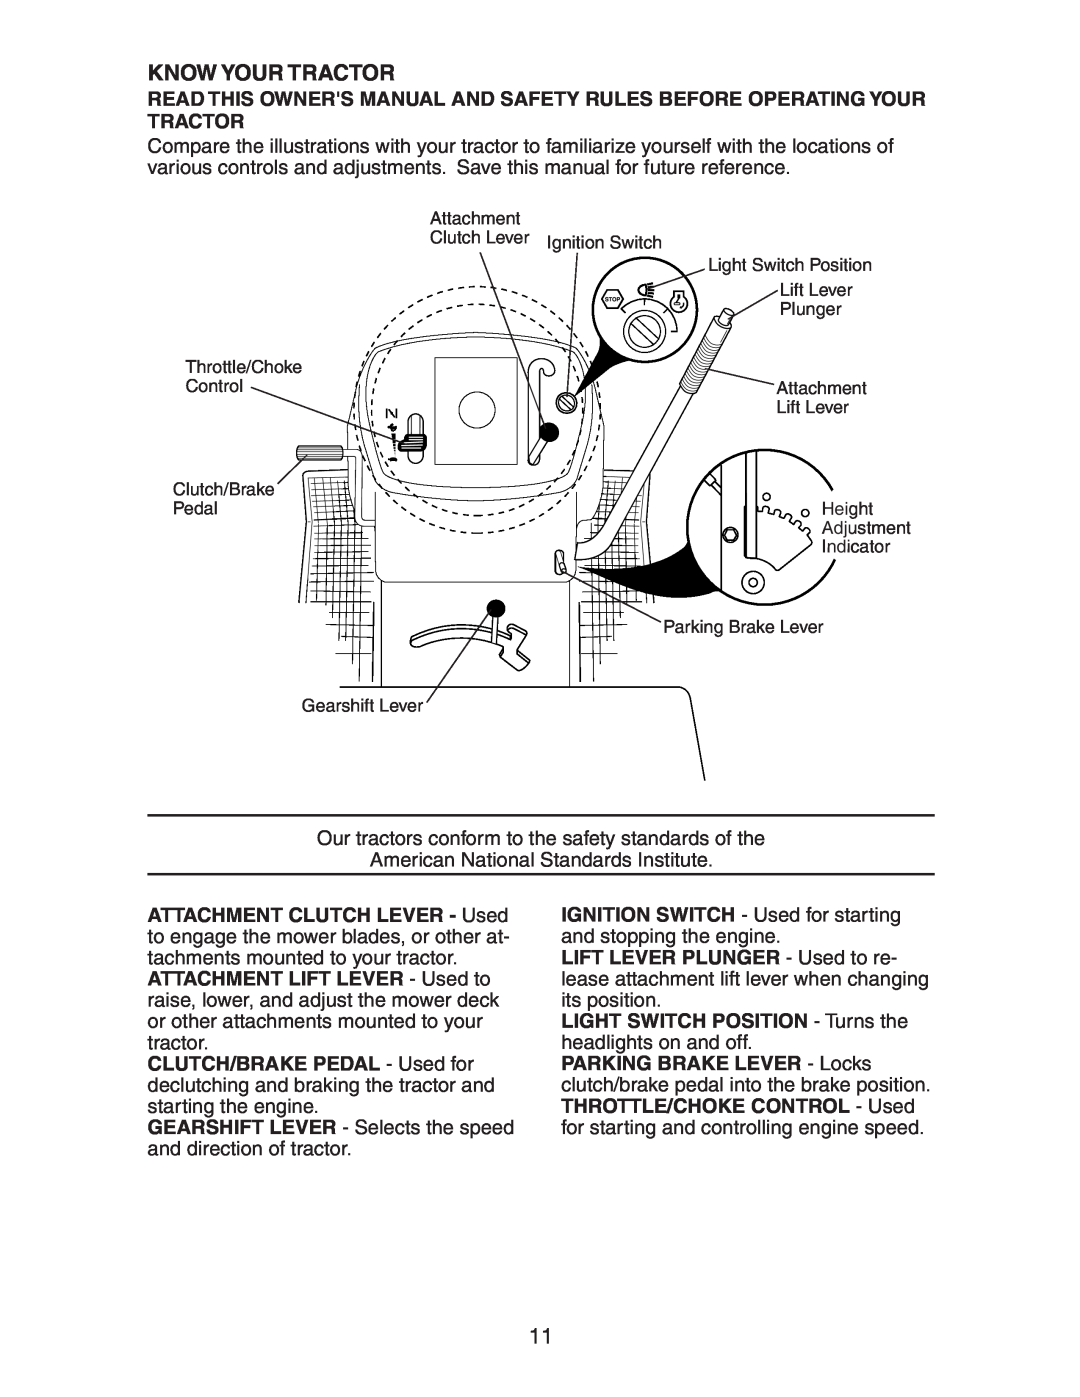 Poulan 271491 manual Know Your Tractor, LIGHT SWITCH POSITION - Turns the headlights on and off 